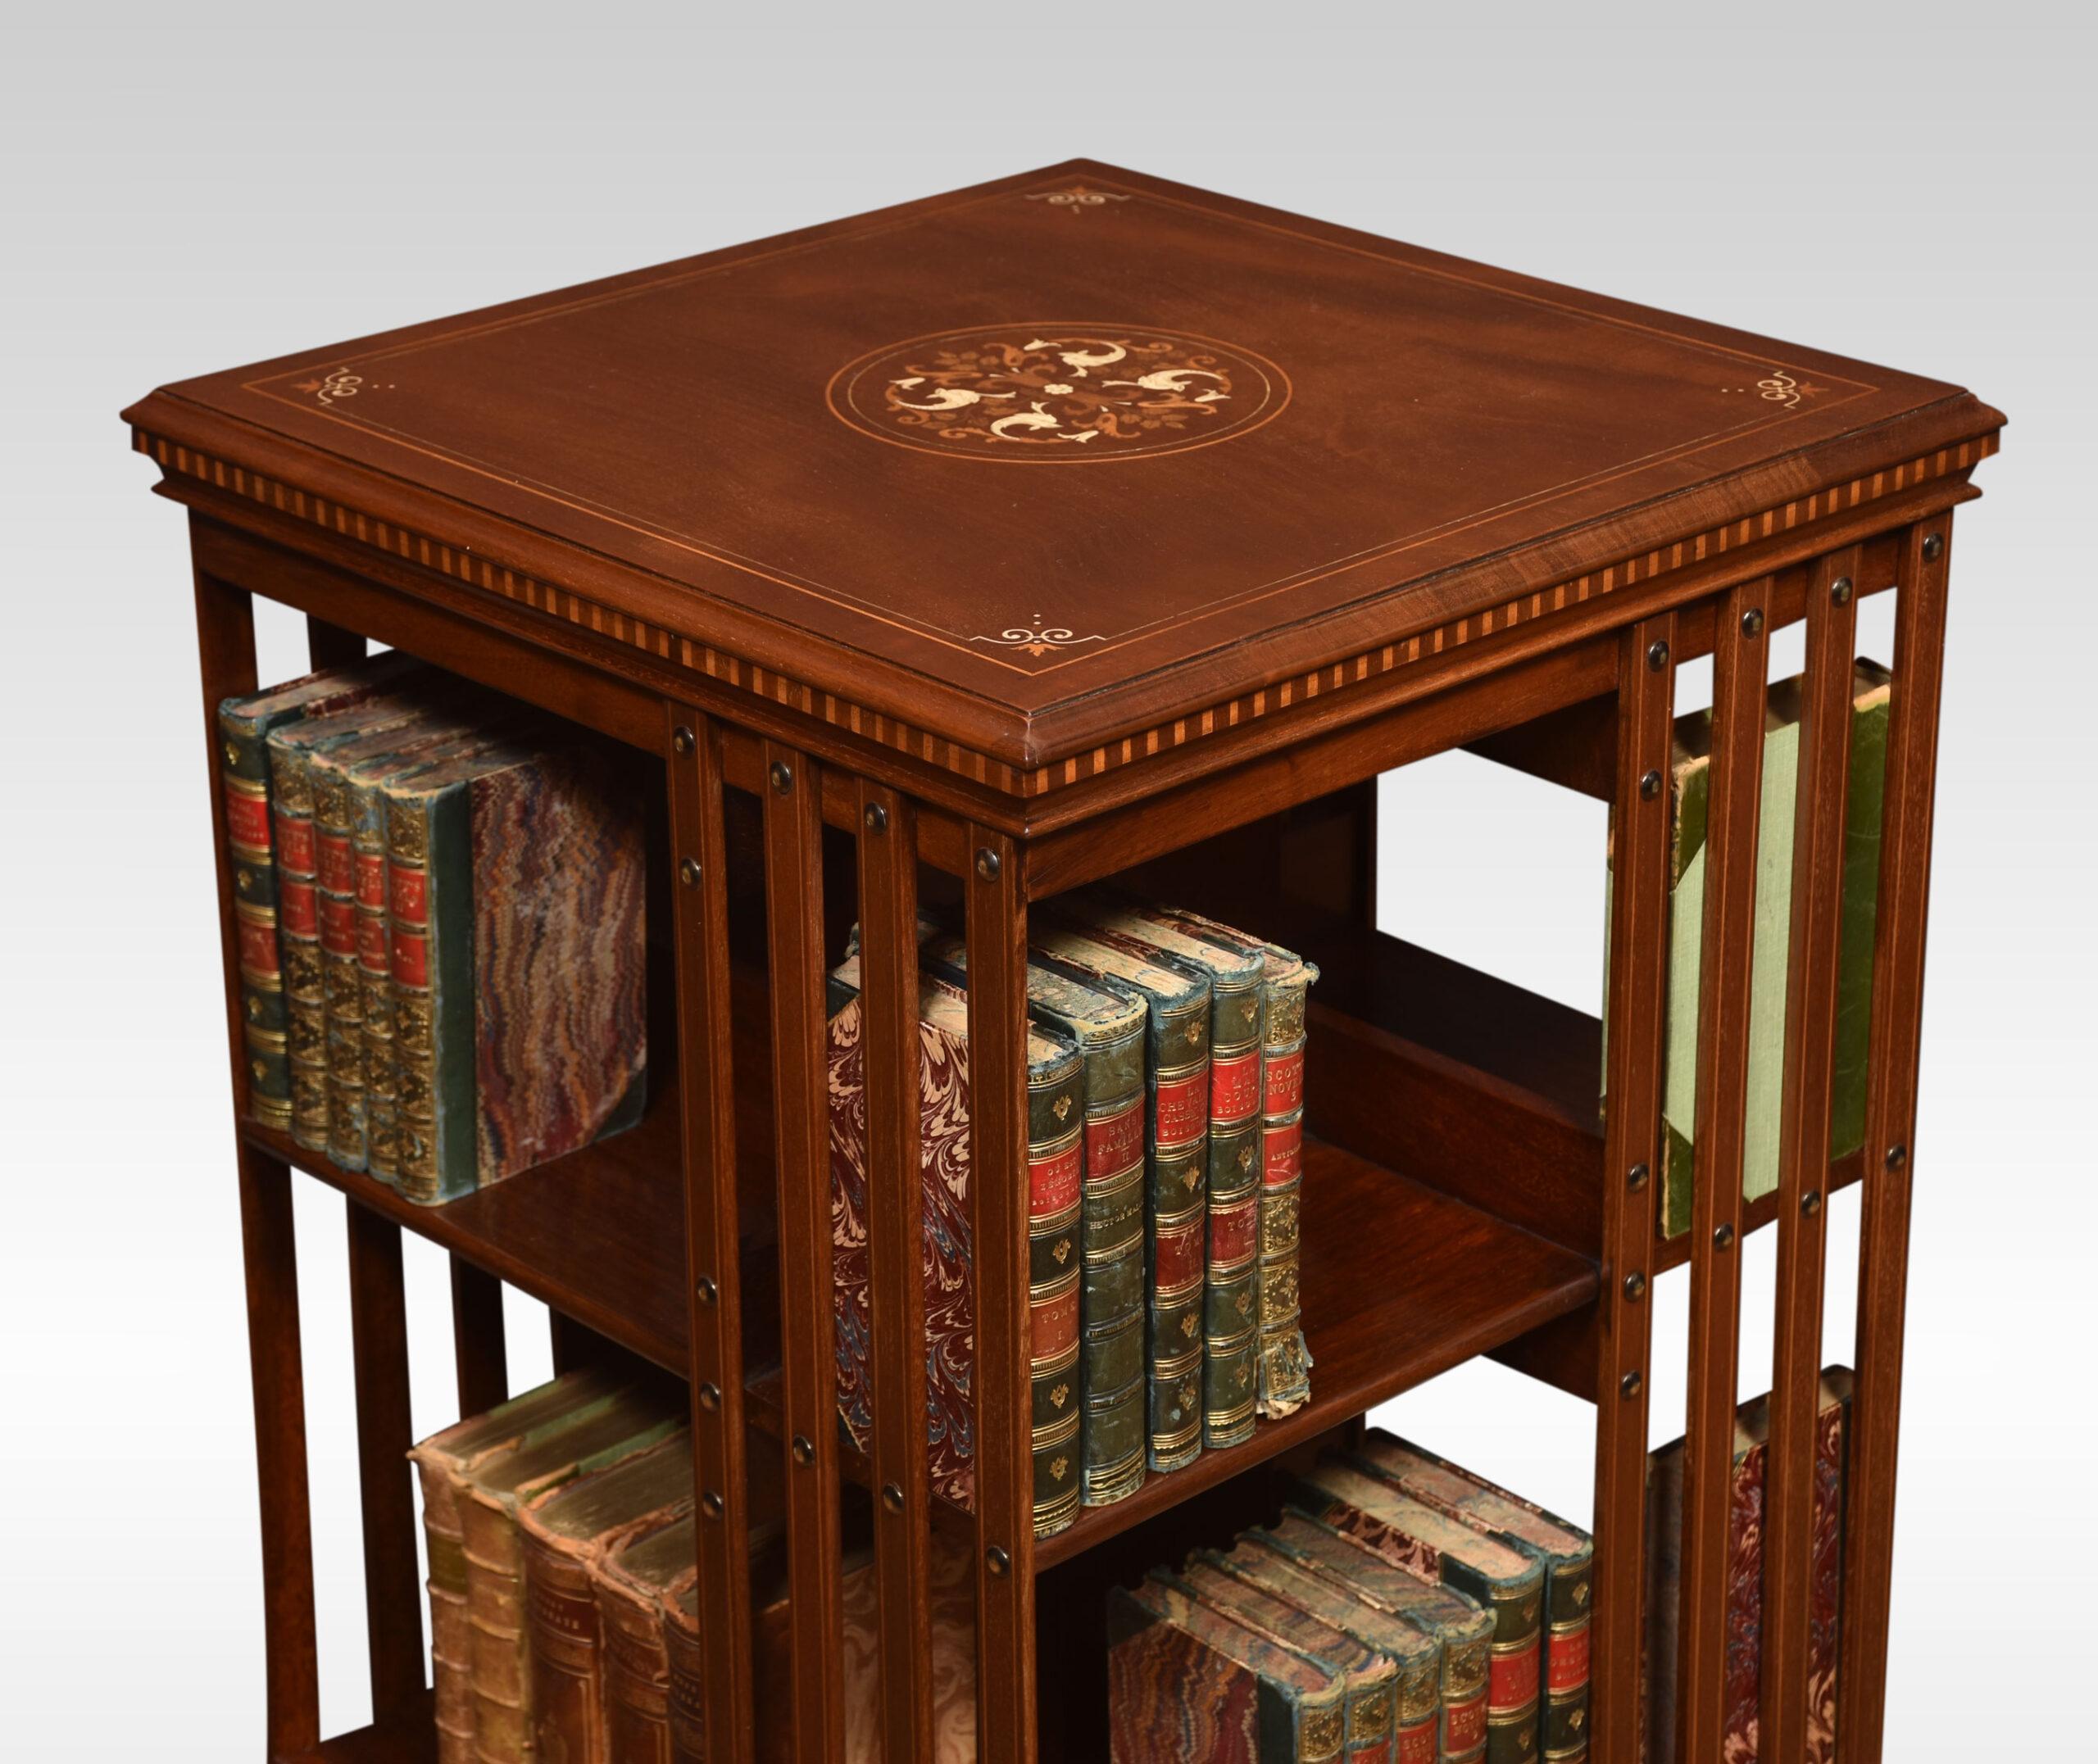 Revolving bookcase the foliated and line inlaid top, above an arrangement of shelves raised up on a cruciform base with castors almost certainly by Maple & Co.
Dimensions
Height 34.5 inches
Width 20 inches
Depth 20 inches.